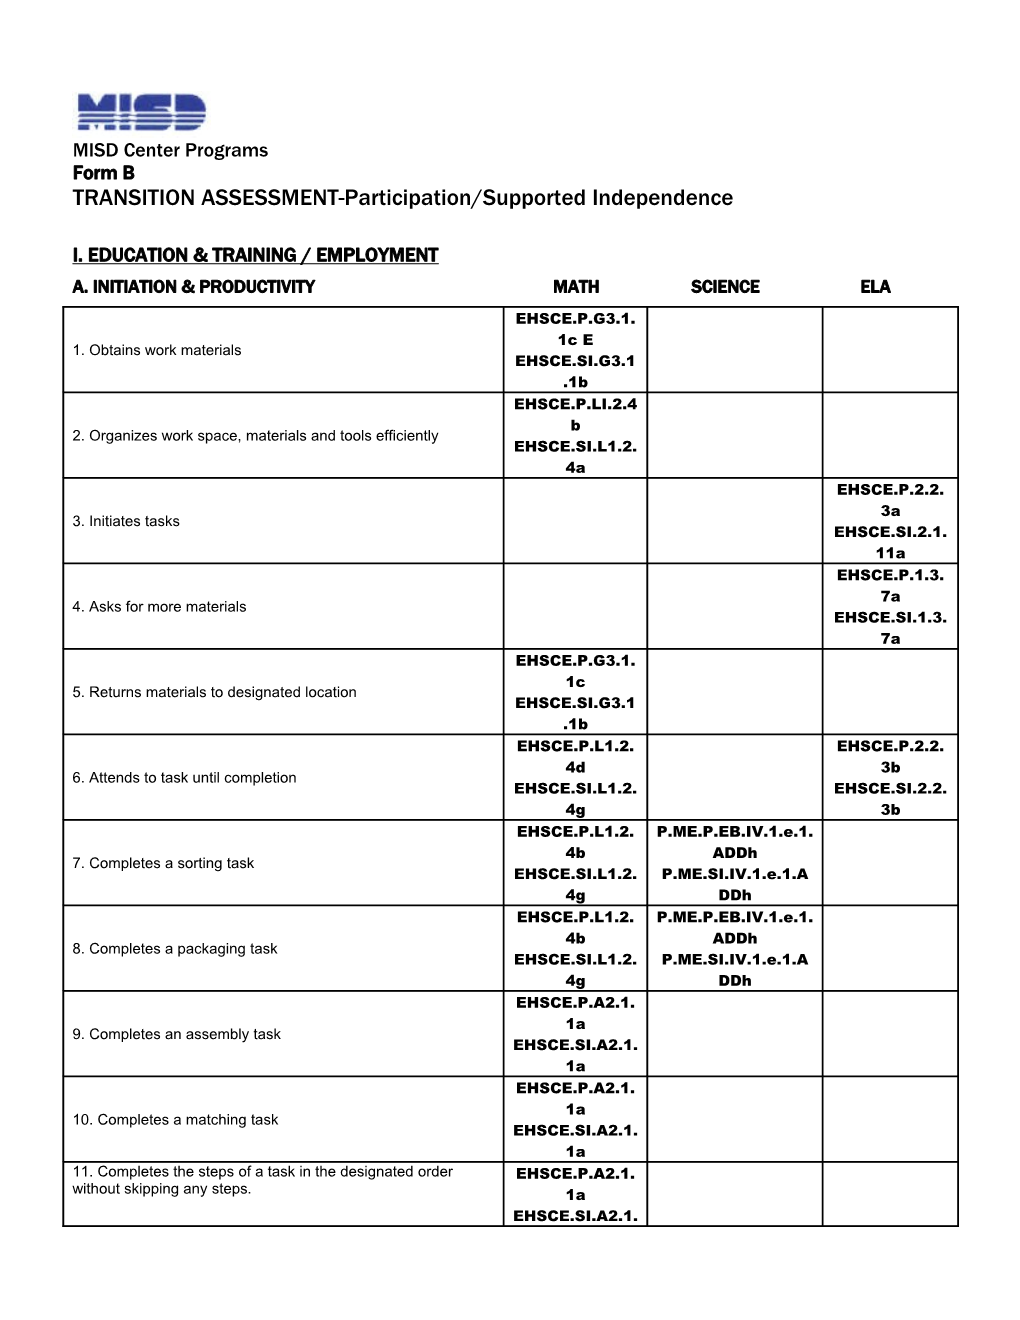 TRANSITION ASSESSMENT-Participation/Supported Independence